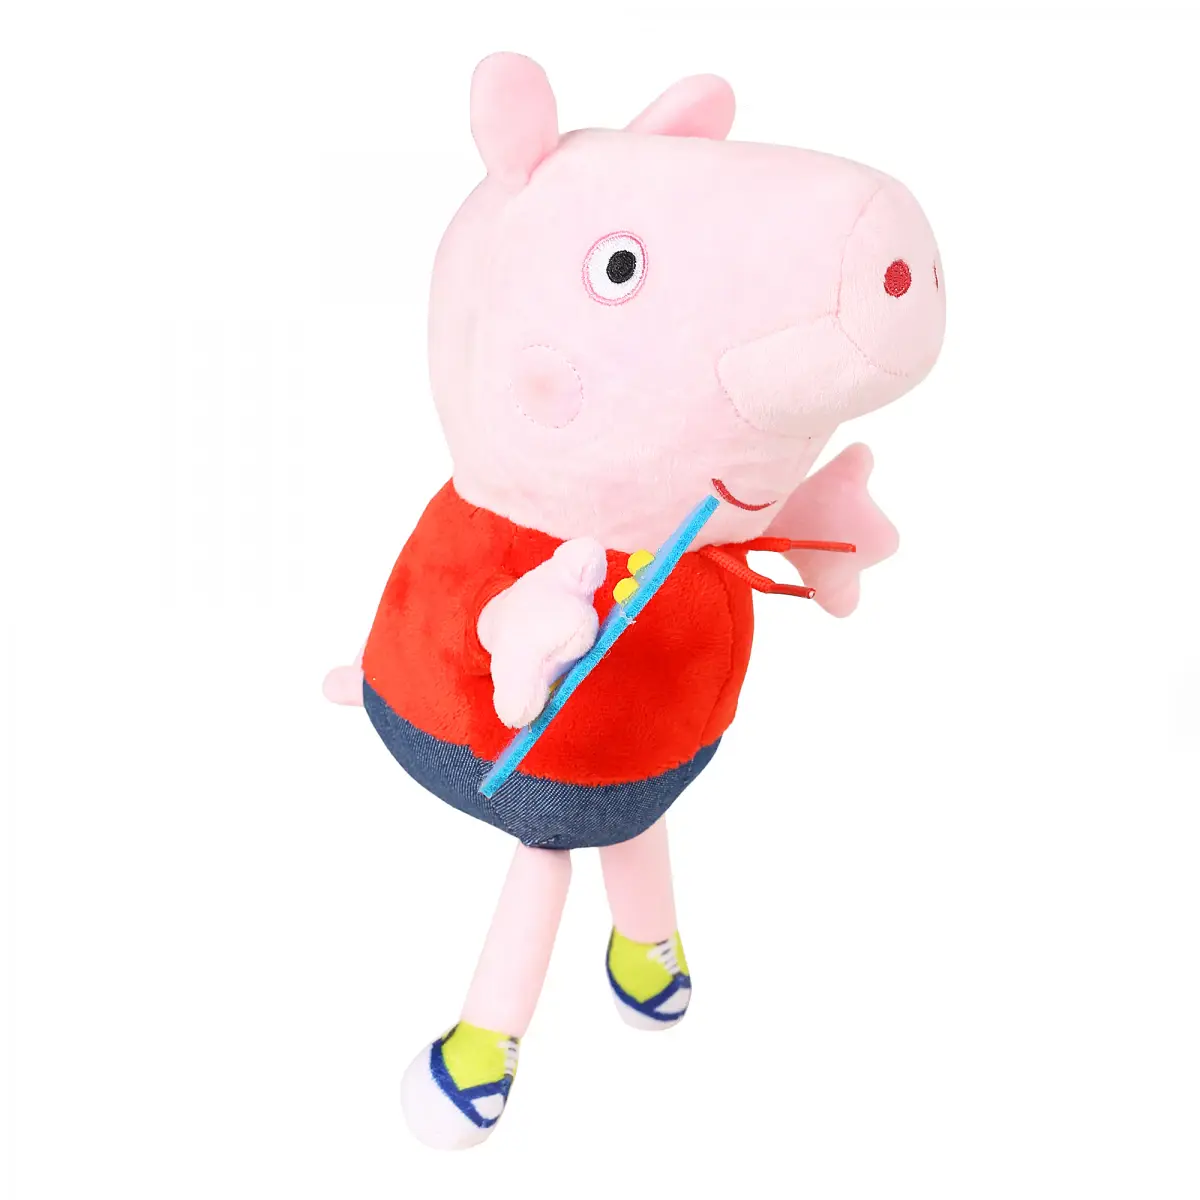 Peppa Pig Fancy George Soft Toy for Kids, 30cm, 18M+, Multicolour